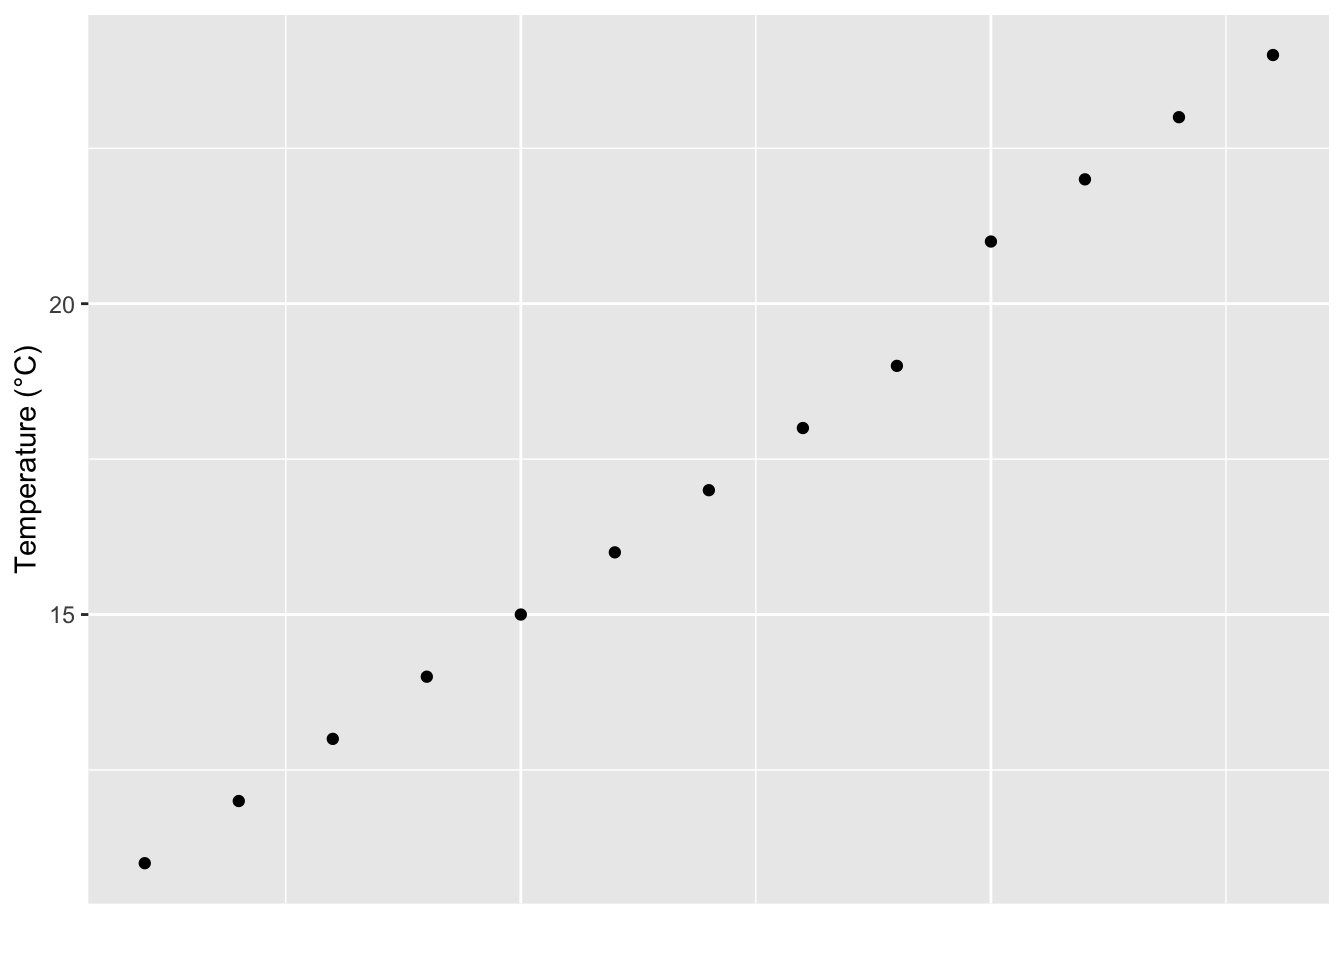 Dot plot showing range of mean temperatures for the time series in the SACTN dataset.